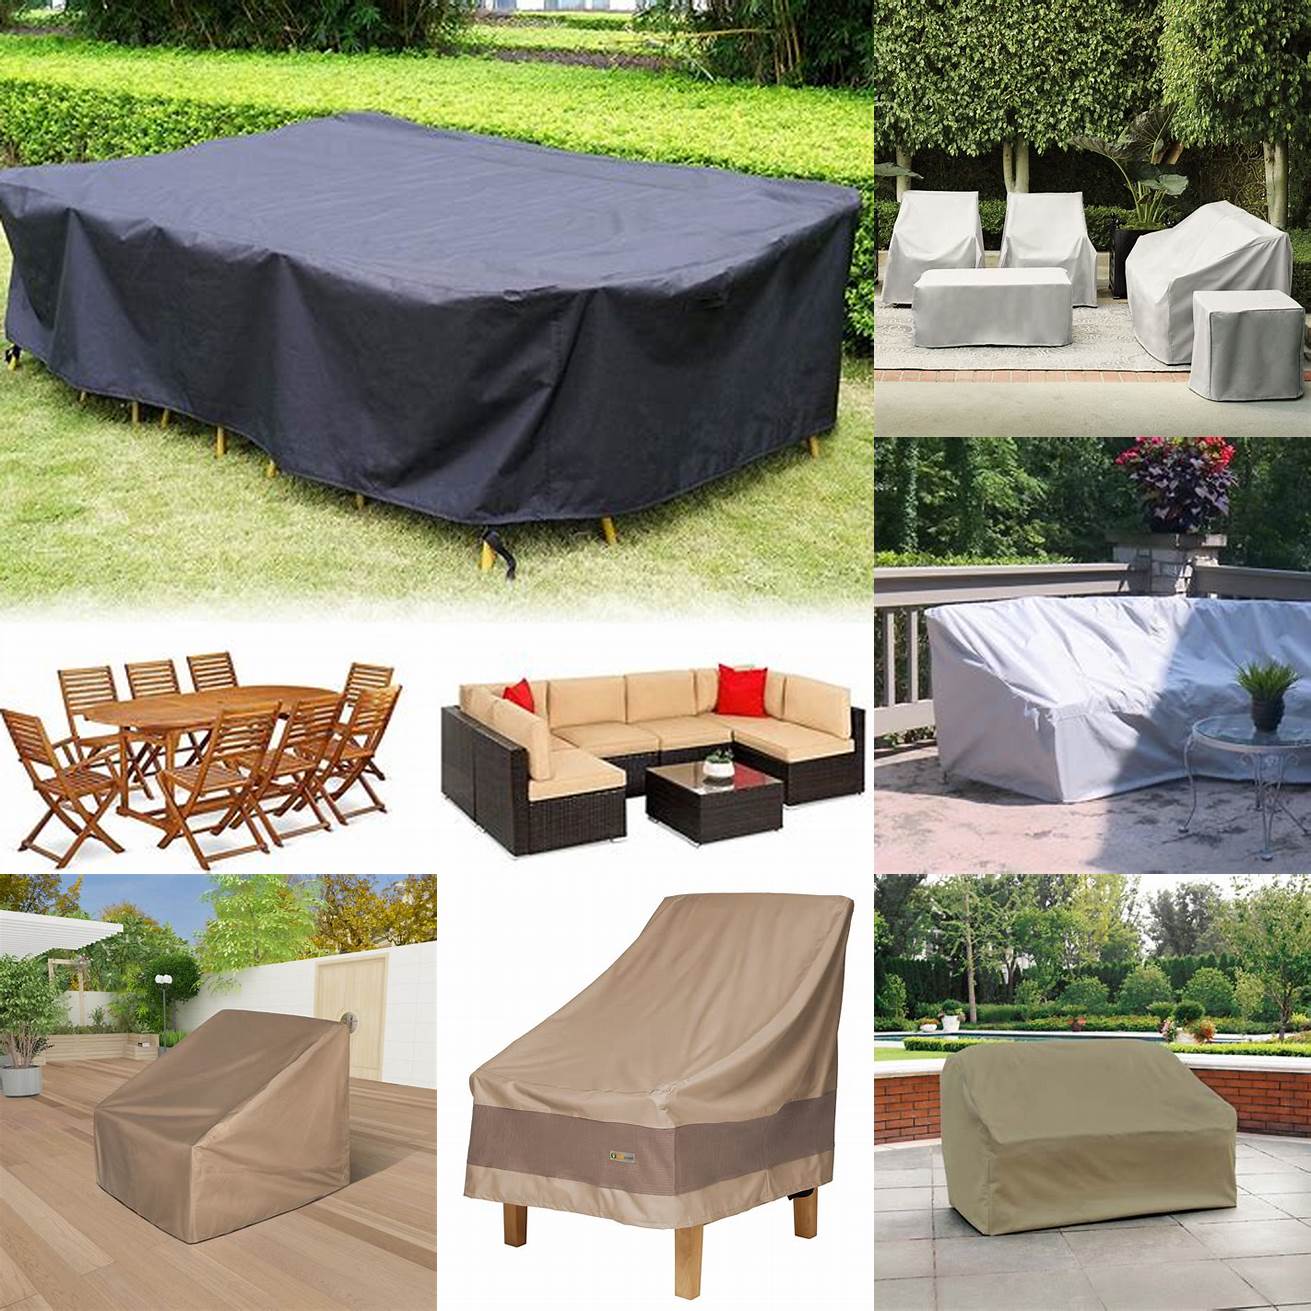 Invest in a good quality outdoor furniture cover